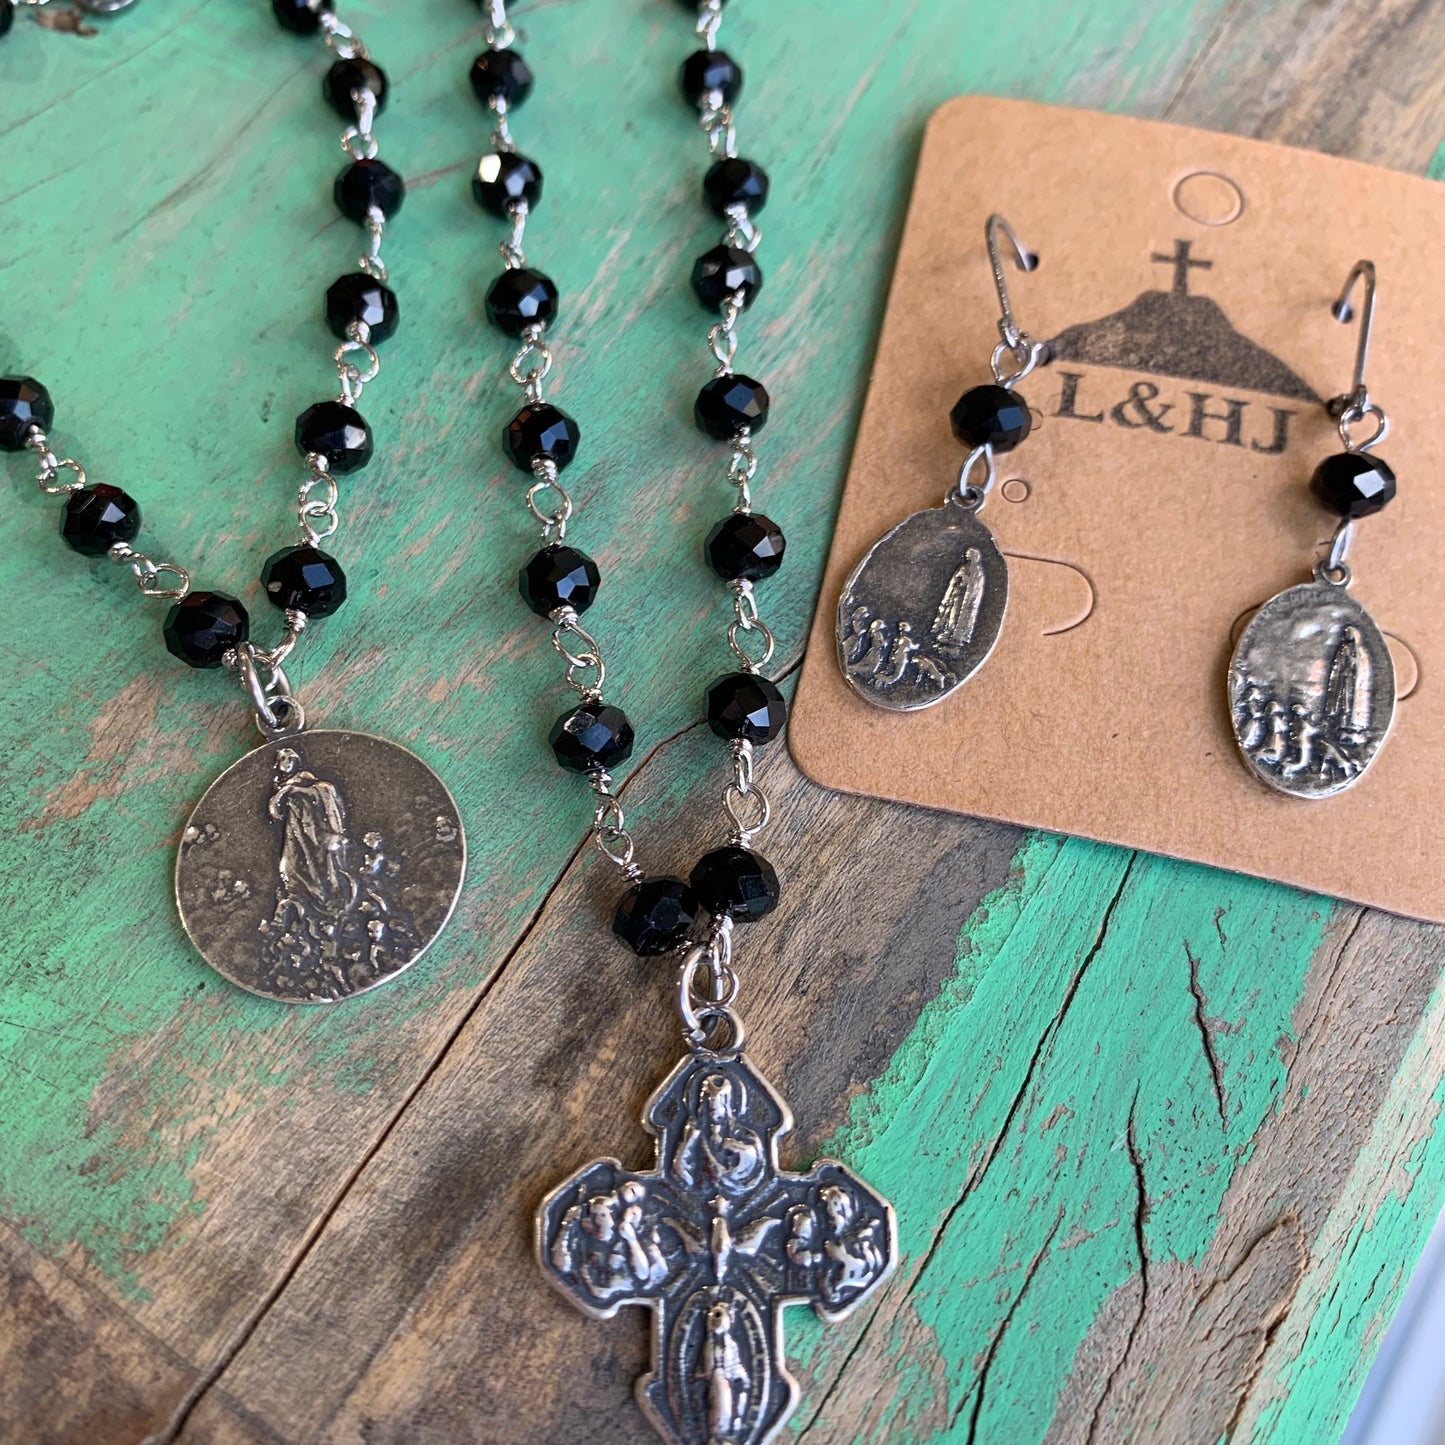 Black and Silver 5 Way Cross Earrings, Bracelet, and Necklace